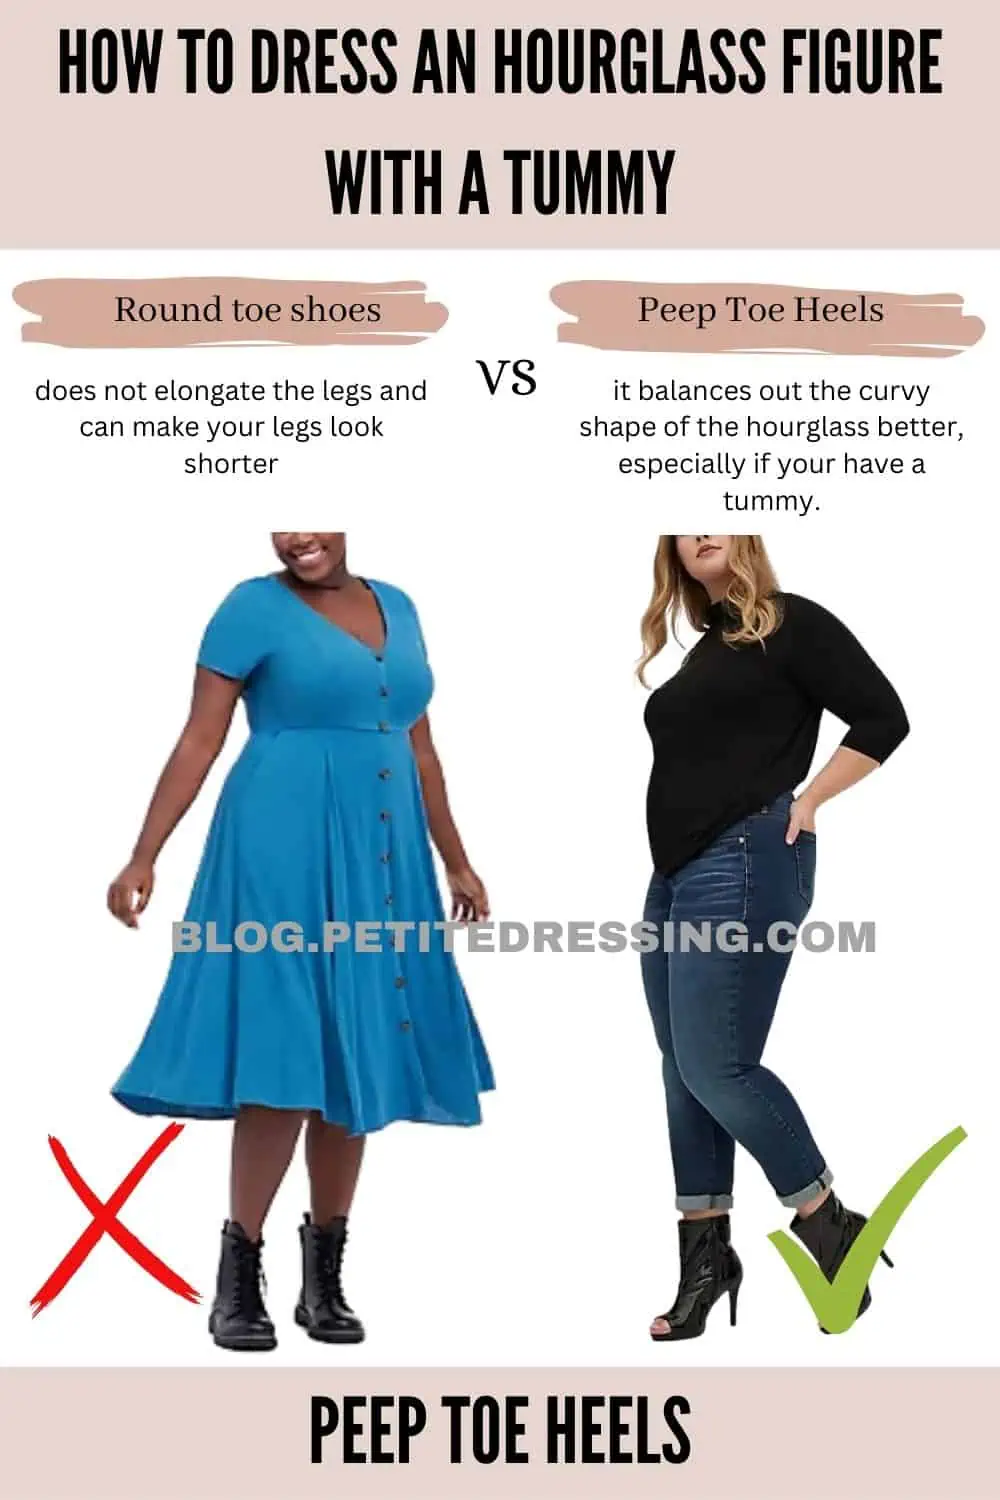 How to dress an hourglass figure with a big tummy - Quora